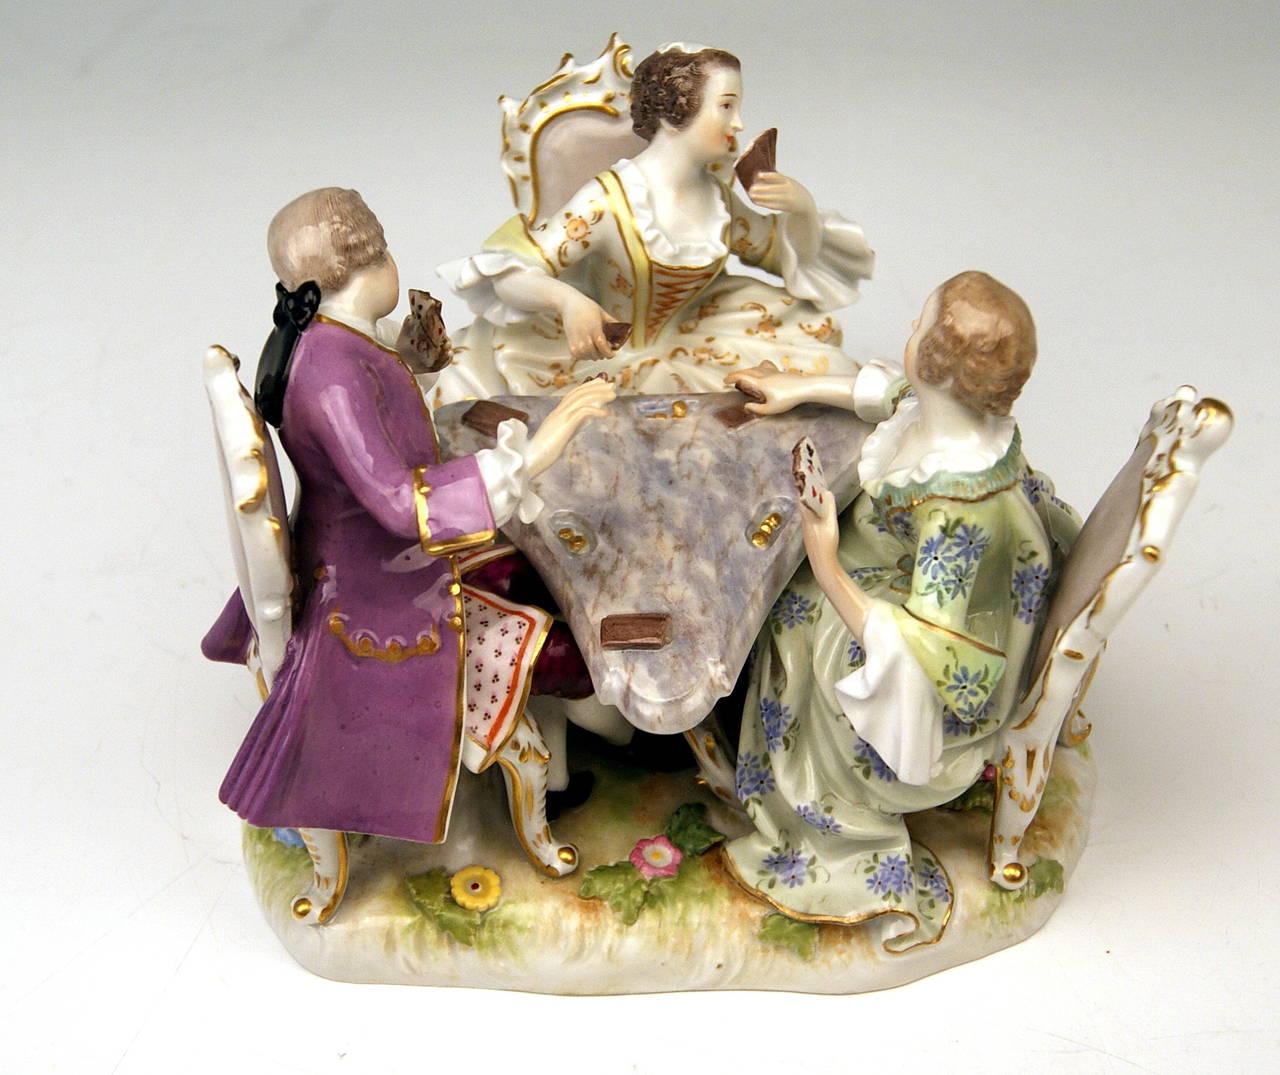 Painted MEISSEN FIGURINE GROUP BY KAENDLER THREE CARD PLAYERS GALLANT FIGURINES  c. 1860